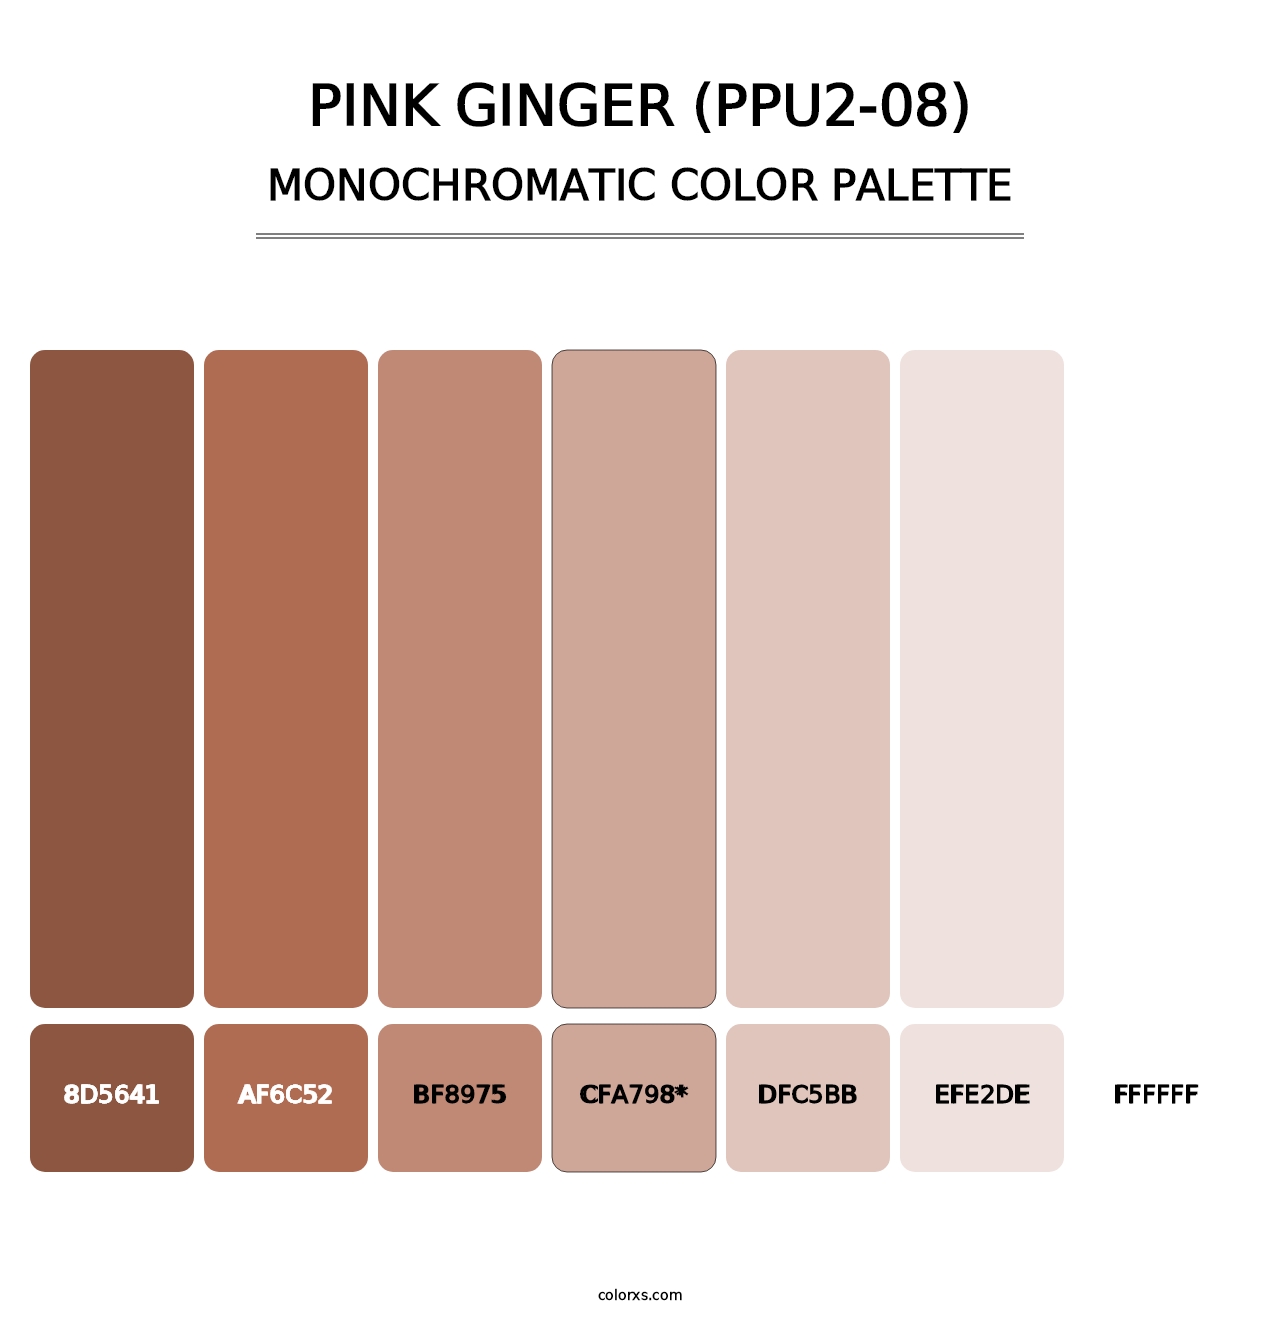 Pink Ginger (PPU2-08) - Monochromatic Color Palette